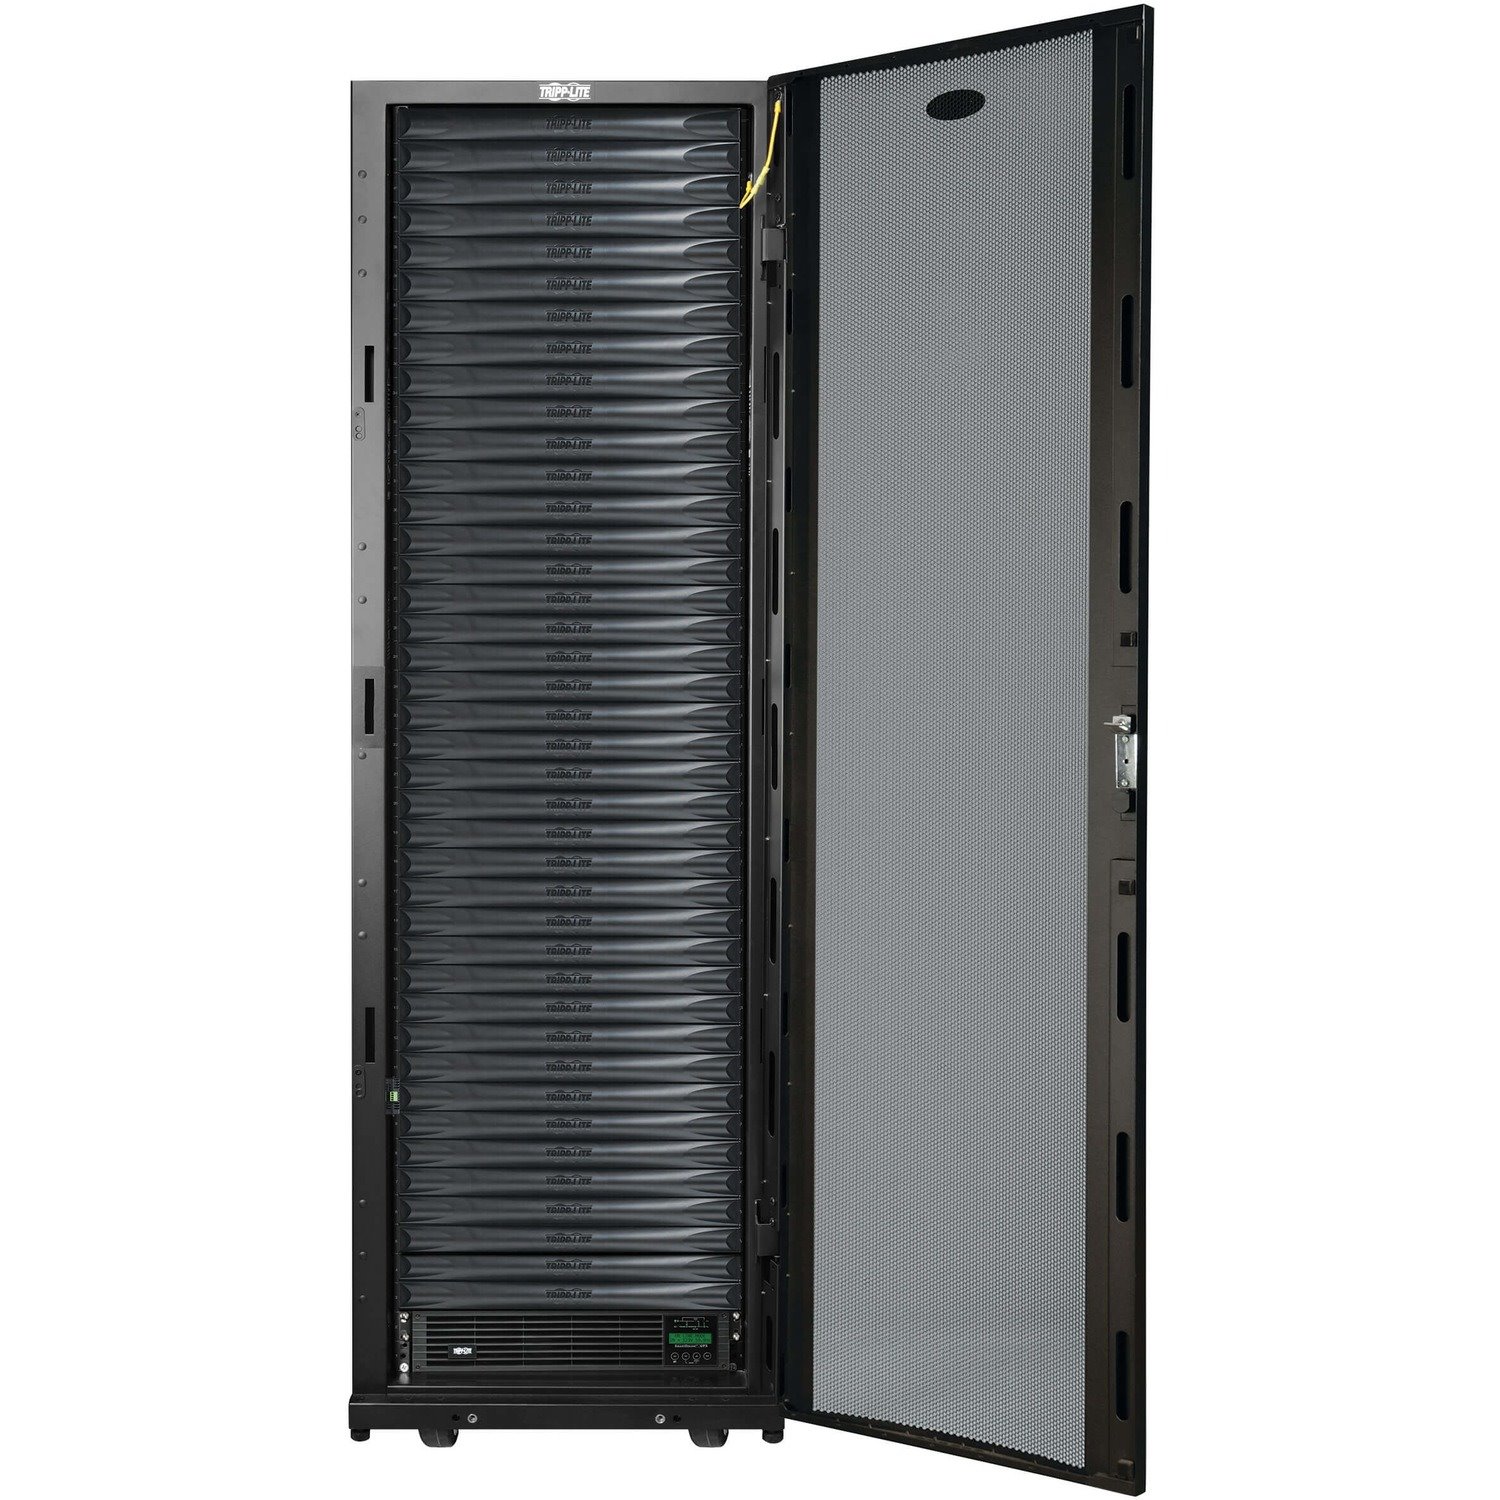 Tripp Lite by Eaton EdgeReady&trade; Micro Data Center - 40U, 3 kVA UPS, Network Management and PDU, 120V Assembled/Tested Unit